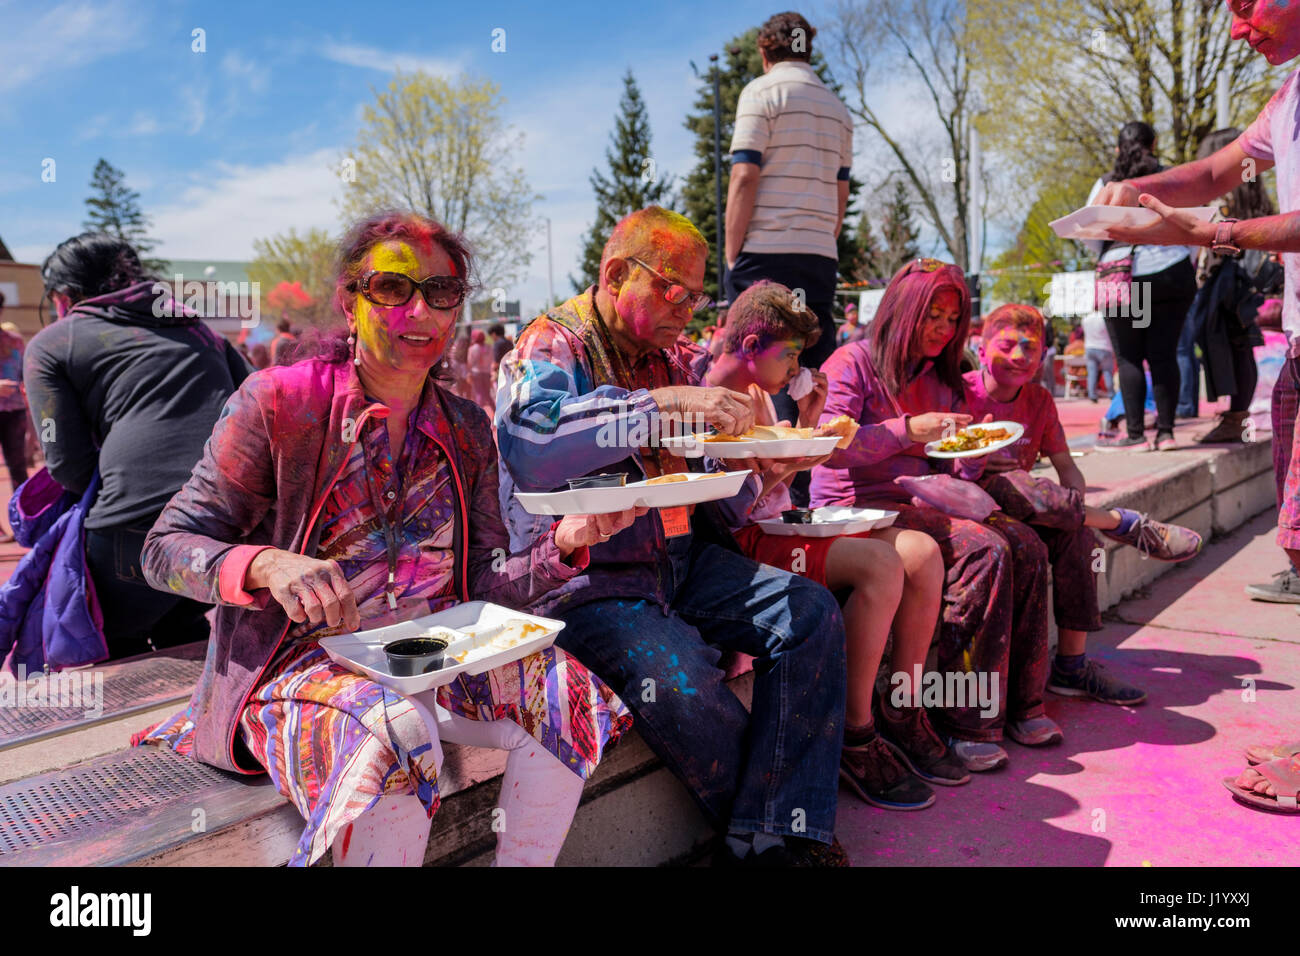 London, Ontario, Canada, 22nd Apr, 2017. A family take a break for eating at Victoria Park during the Holi Spring Festival, also known as Rangwali Holi, Dhuleti, Dhulandi, Phagwah, or simply as Festival of Colours, an Hindu festival to celebrate the arrival of Spring in London, Ontario, Canada. Credit: Rubens Alarcon/Alamy Live News. Stock Photo